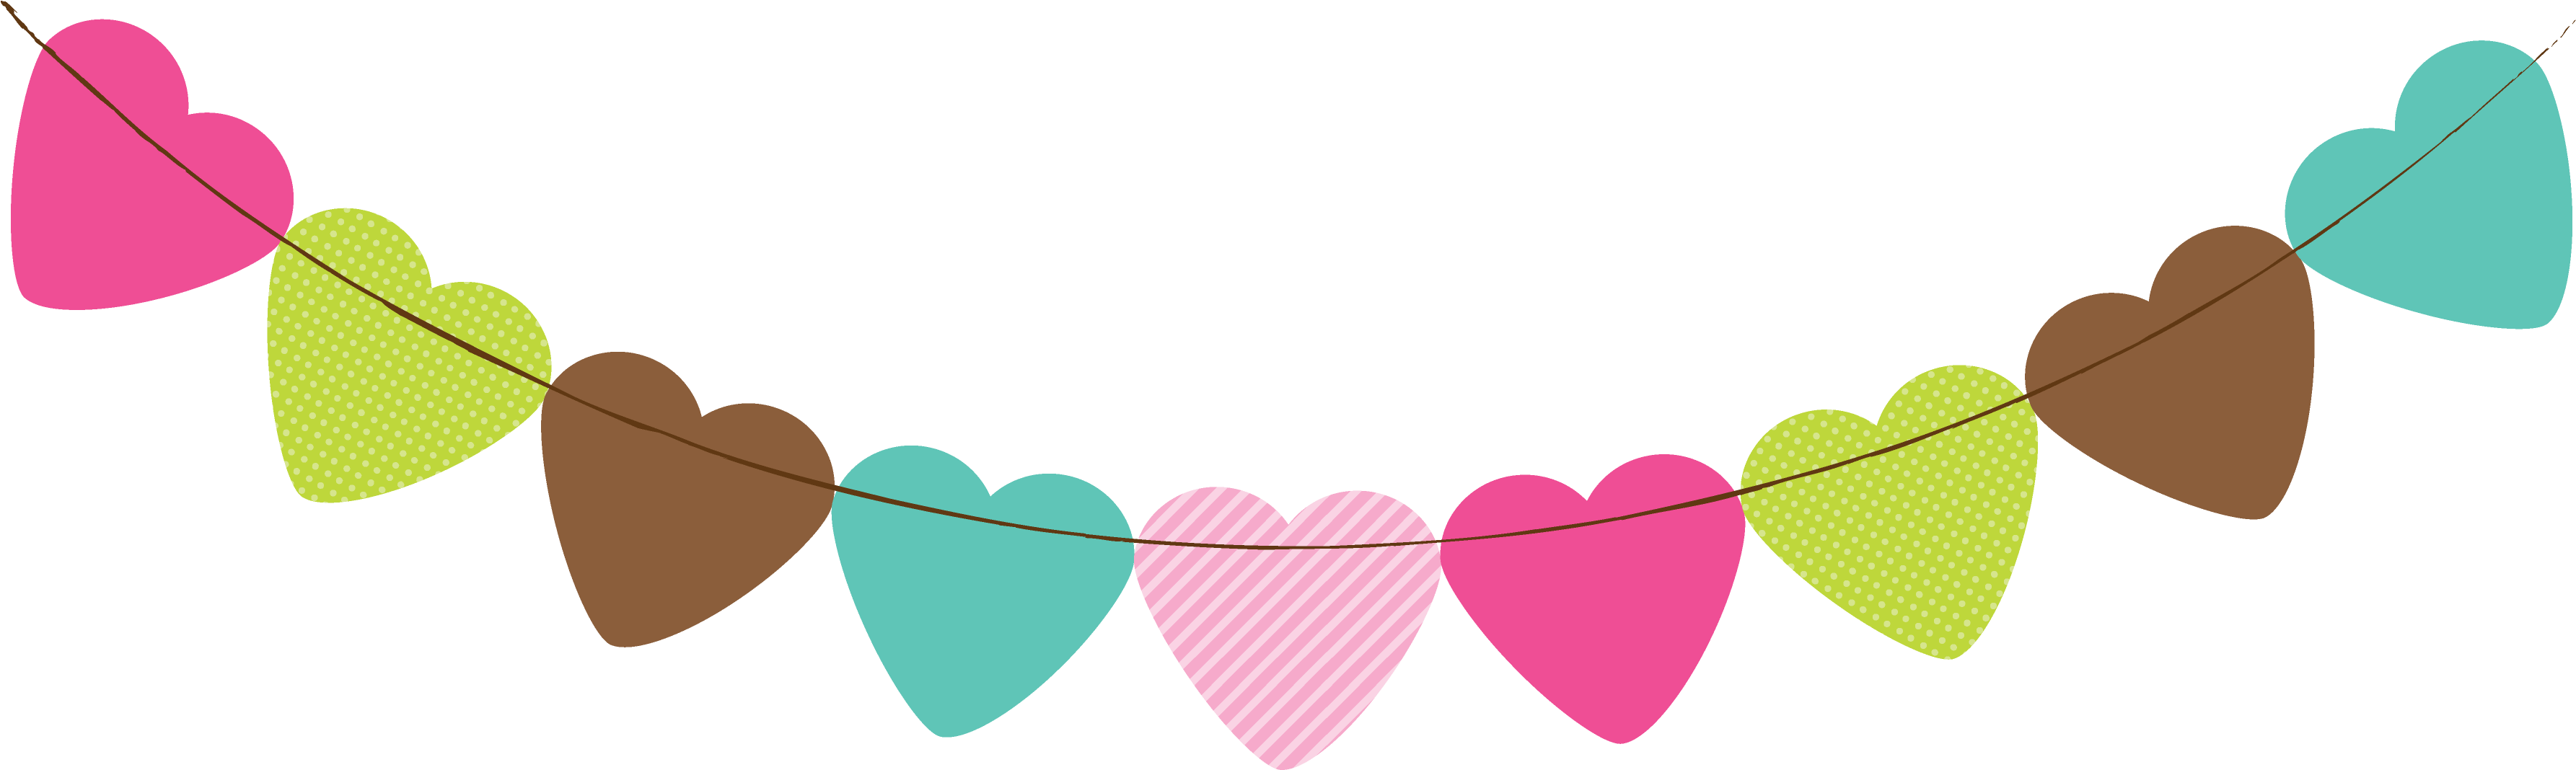 Colorful Heart Banner Graphic PNG